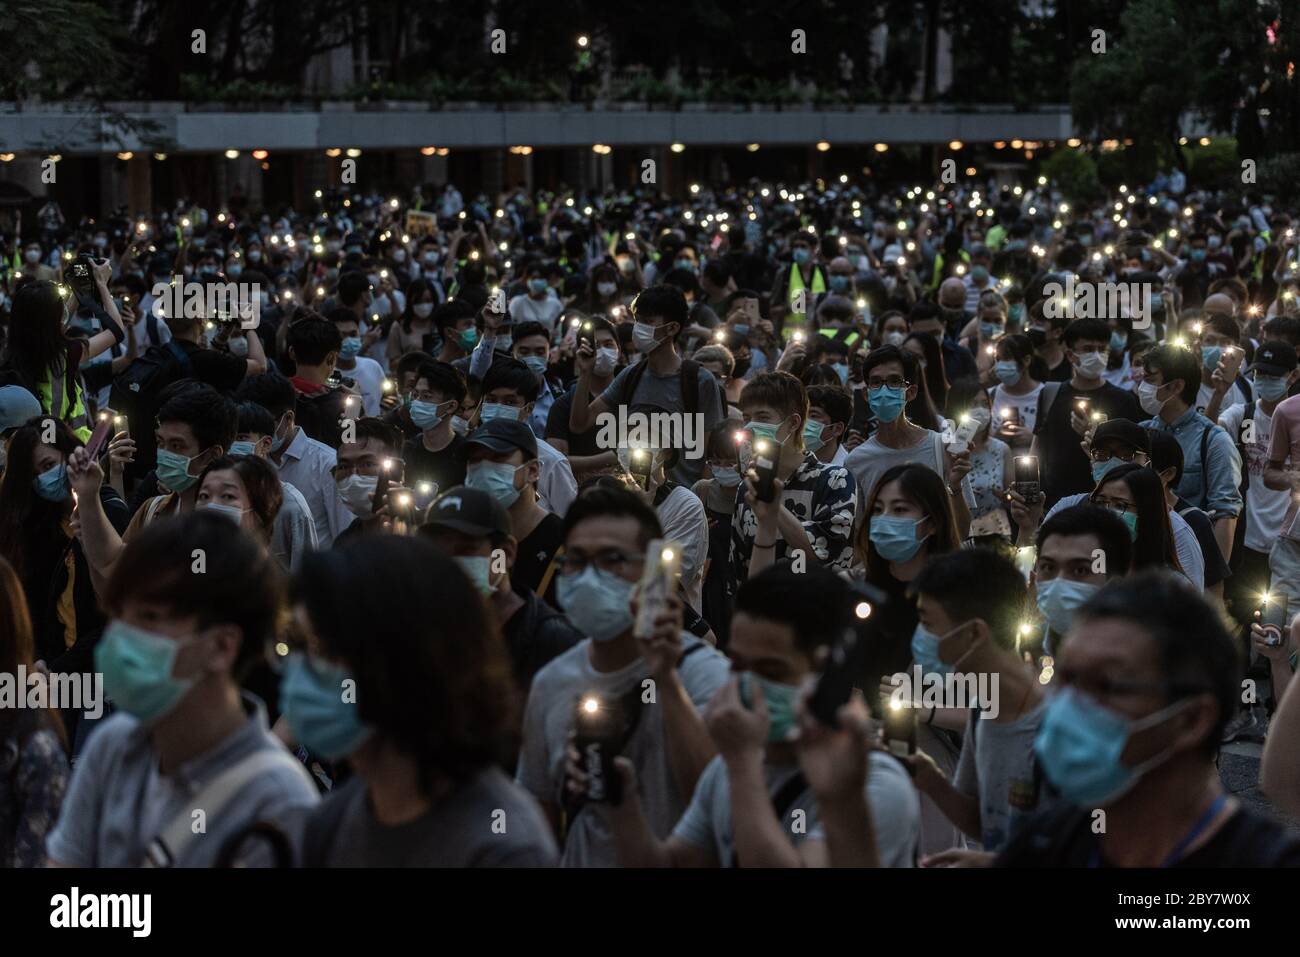 Hong Kong SAR, China. 9th June 2020. Hundreds of Hongkongers defy a police ban to gather in Chater Garden to mark the one year anniversary of the Hong Kong pro-democracy protests. Credit: Ben Marans/Alamy Live News. Stock Photo